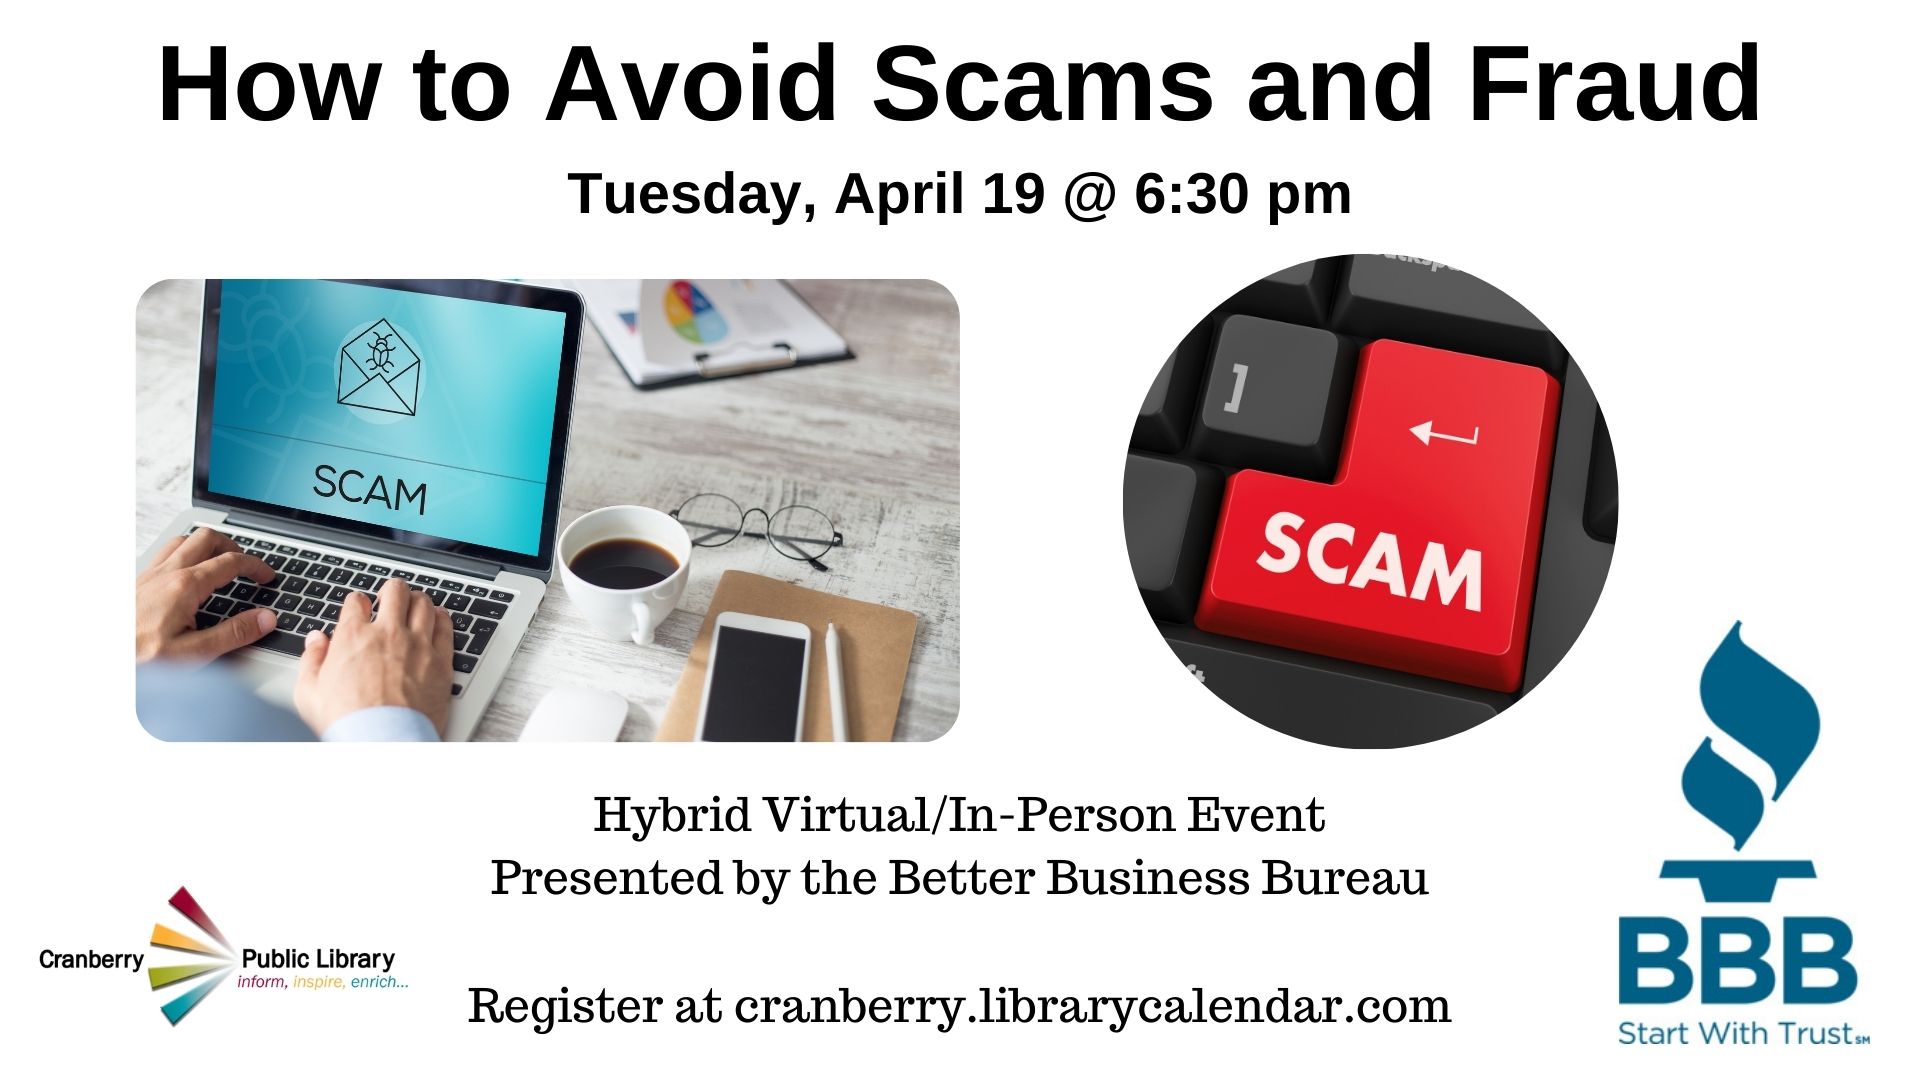 Flyer for How to Avoid Scams and Fraud program